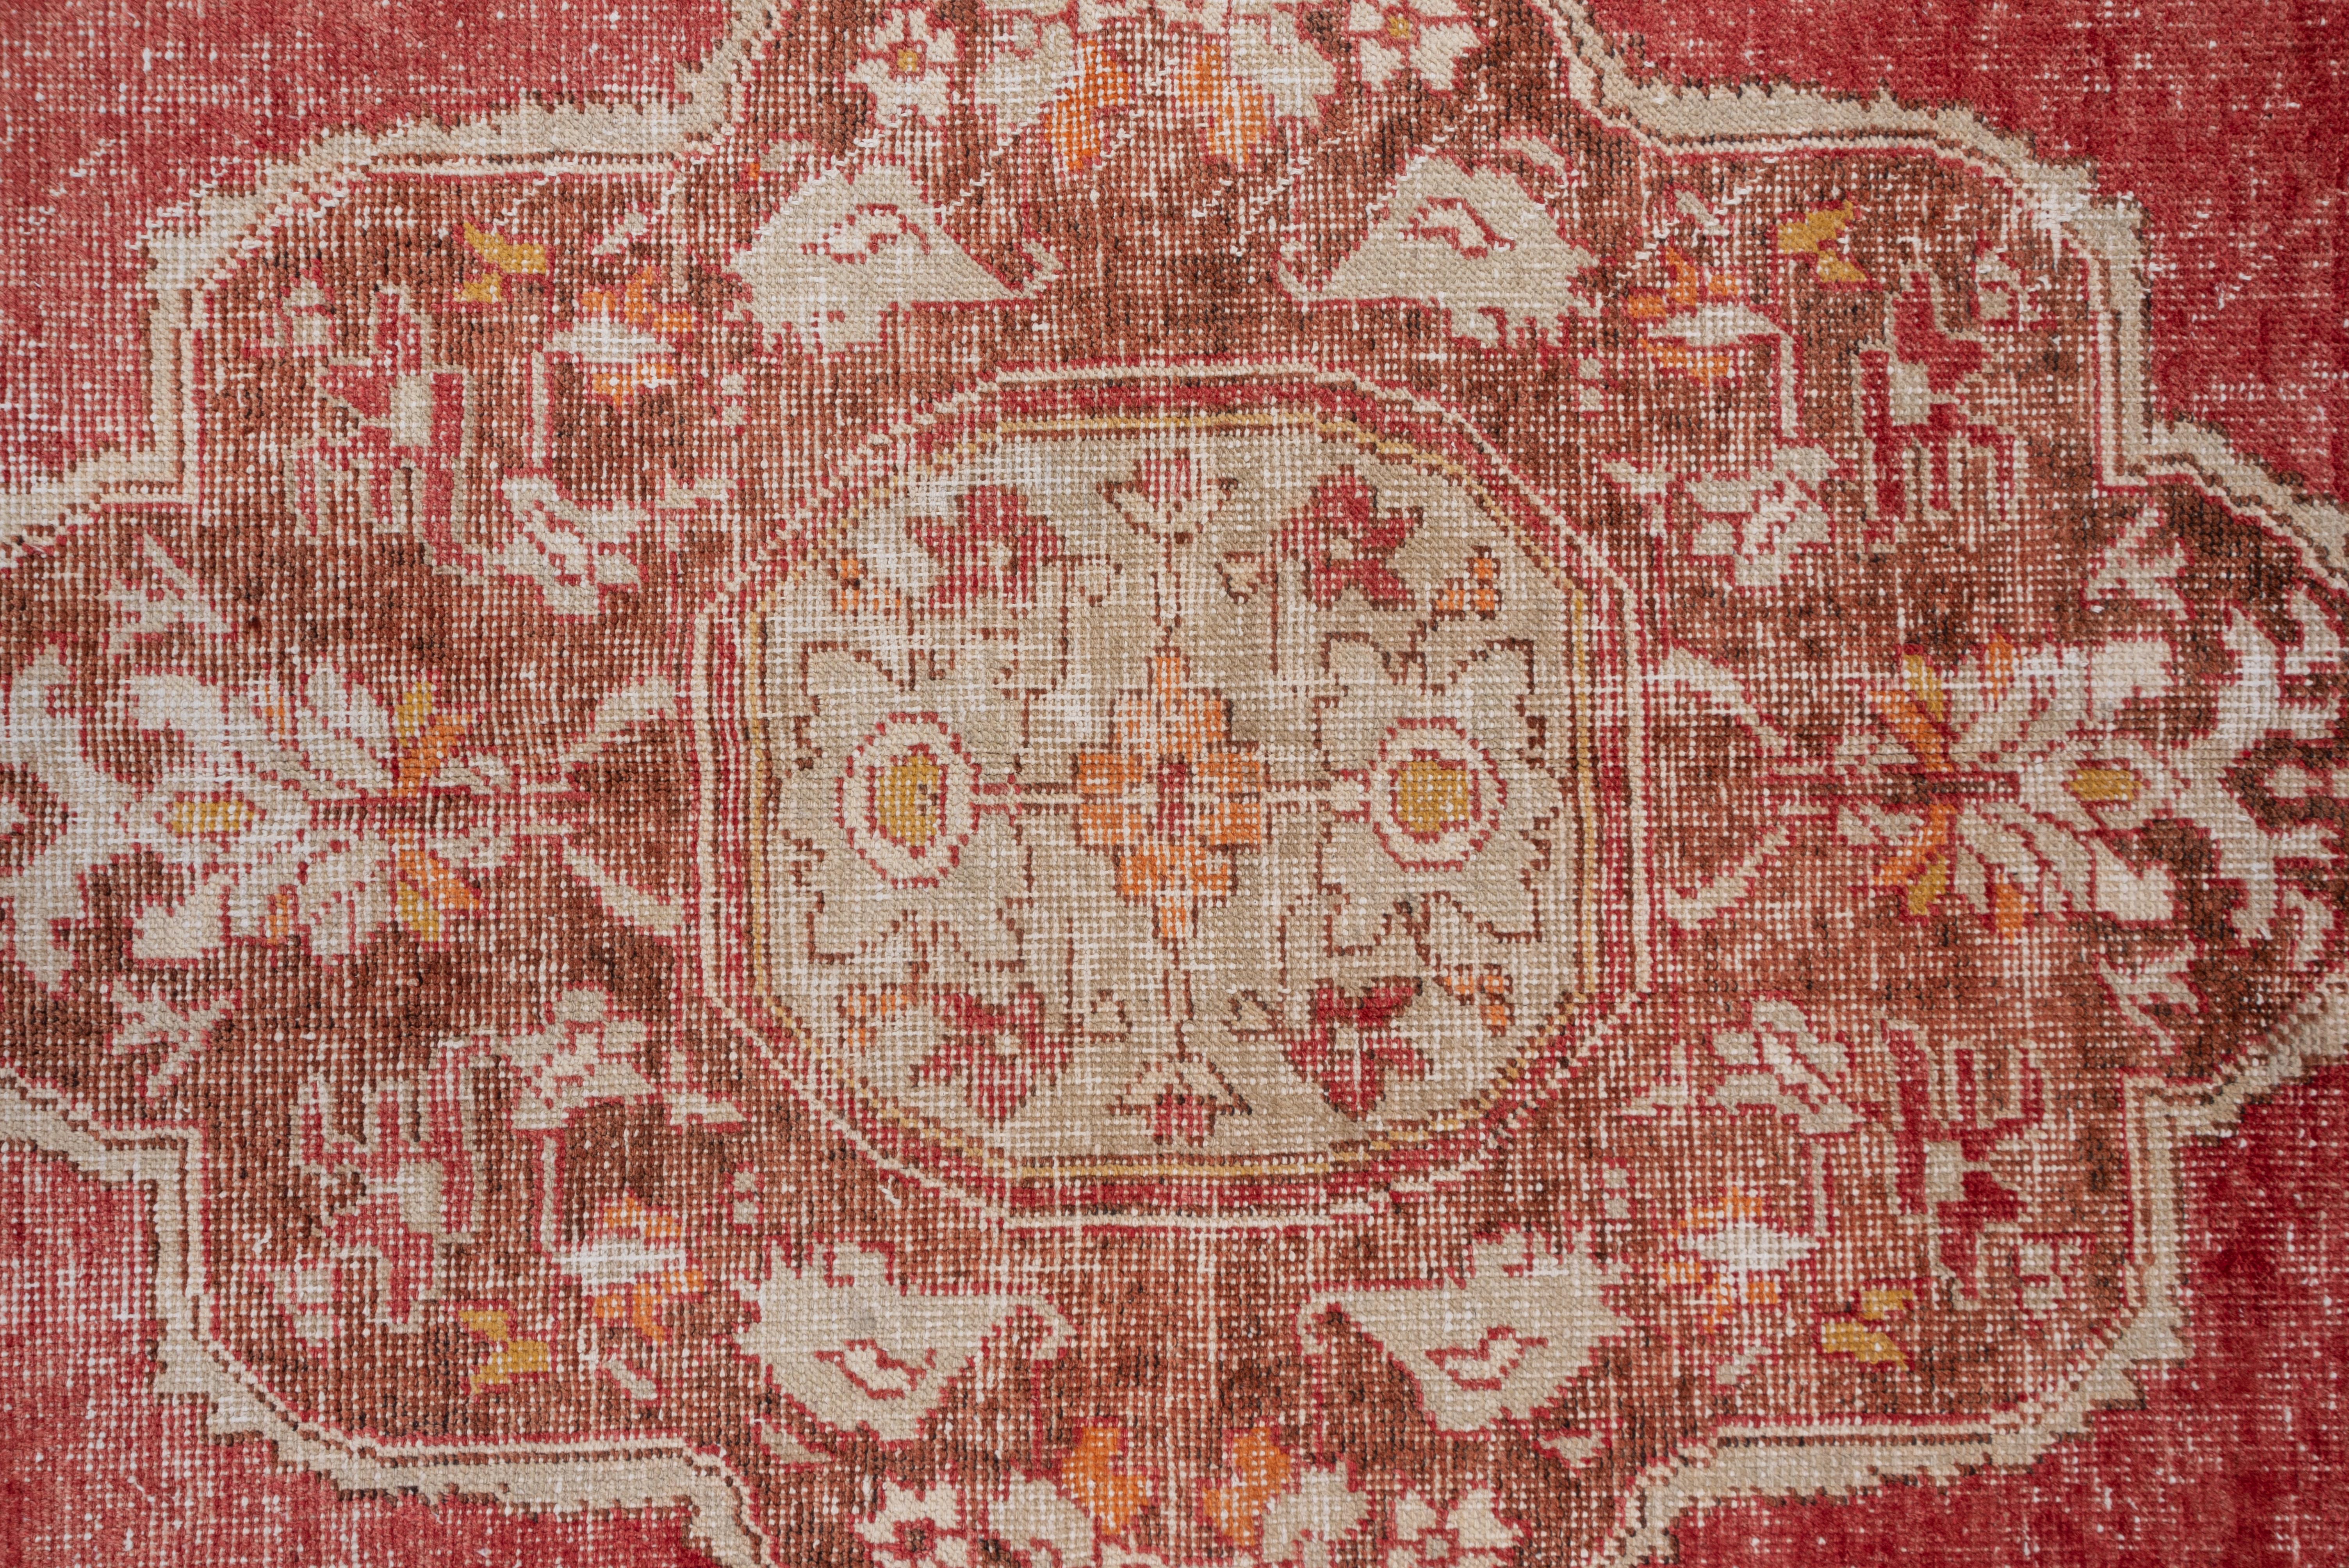 Wool Antique Turkish Oushak Rug, Red, Gray and Brown Field, Even Wear For Sale